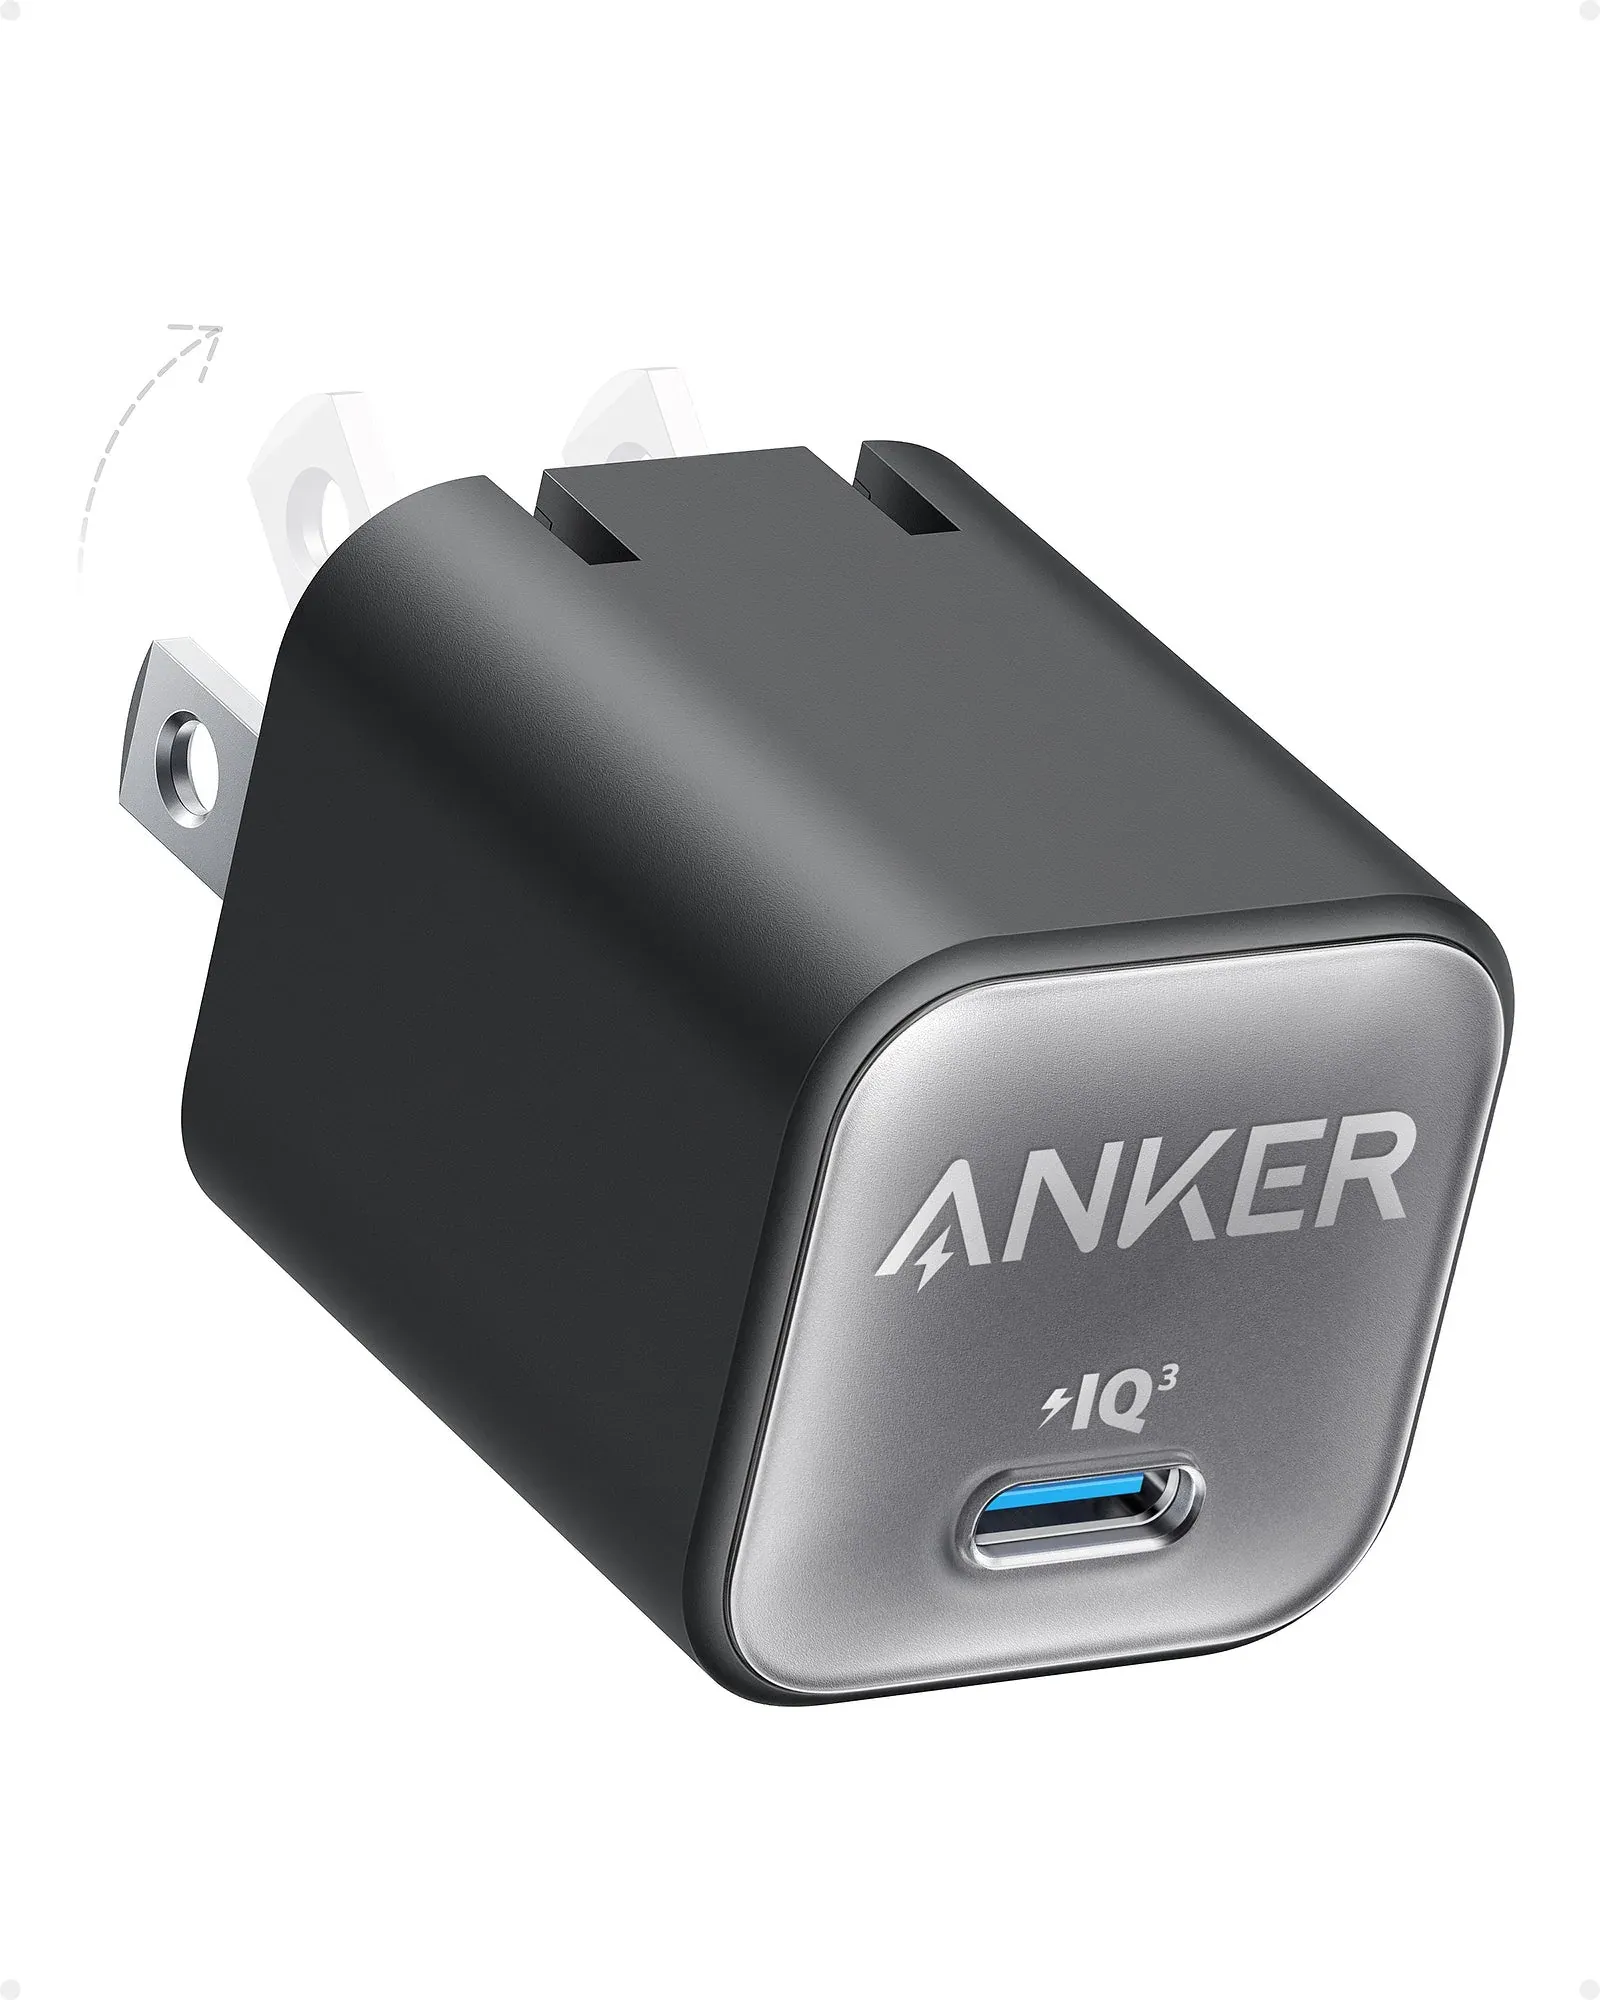 Anker Nano 3 is one of the smallest GaN-based chargers on the market.  It can supply up to 30 watts of power to compatible devices and comes in 5 colors.  The company also offers a 24-month warranty on the charger.